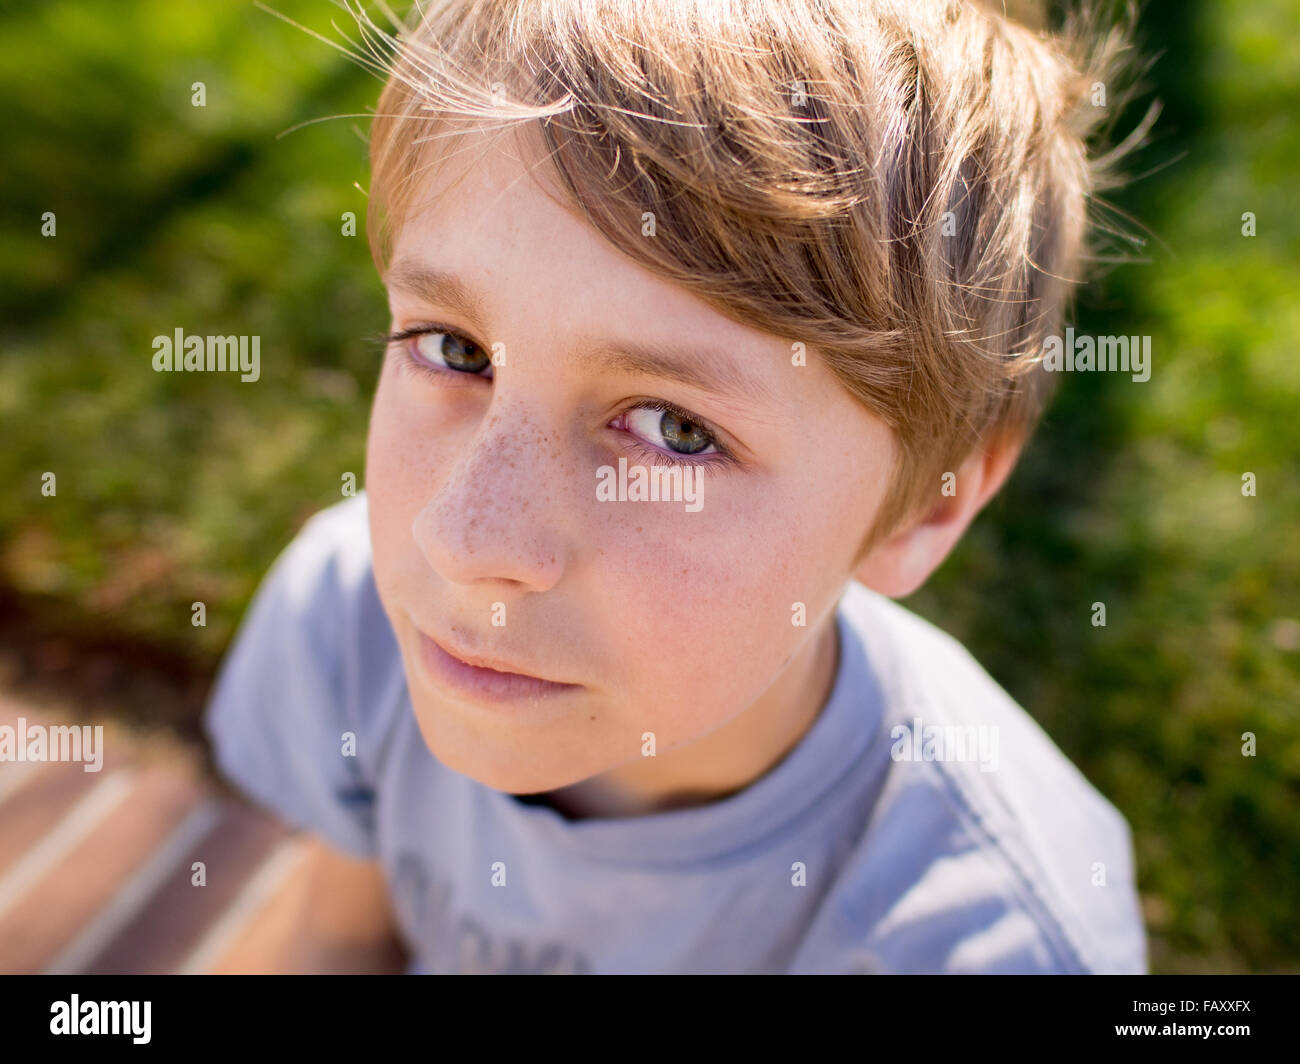 Close up portrait of 12 year old boy in sunshine Stock Photo